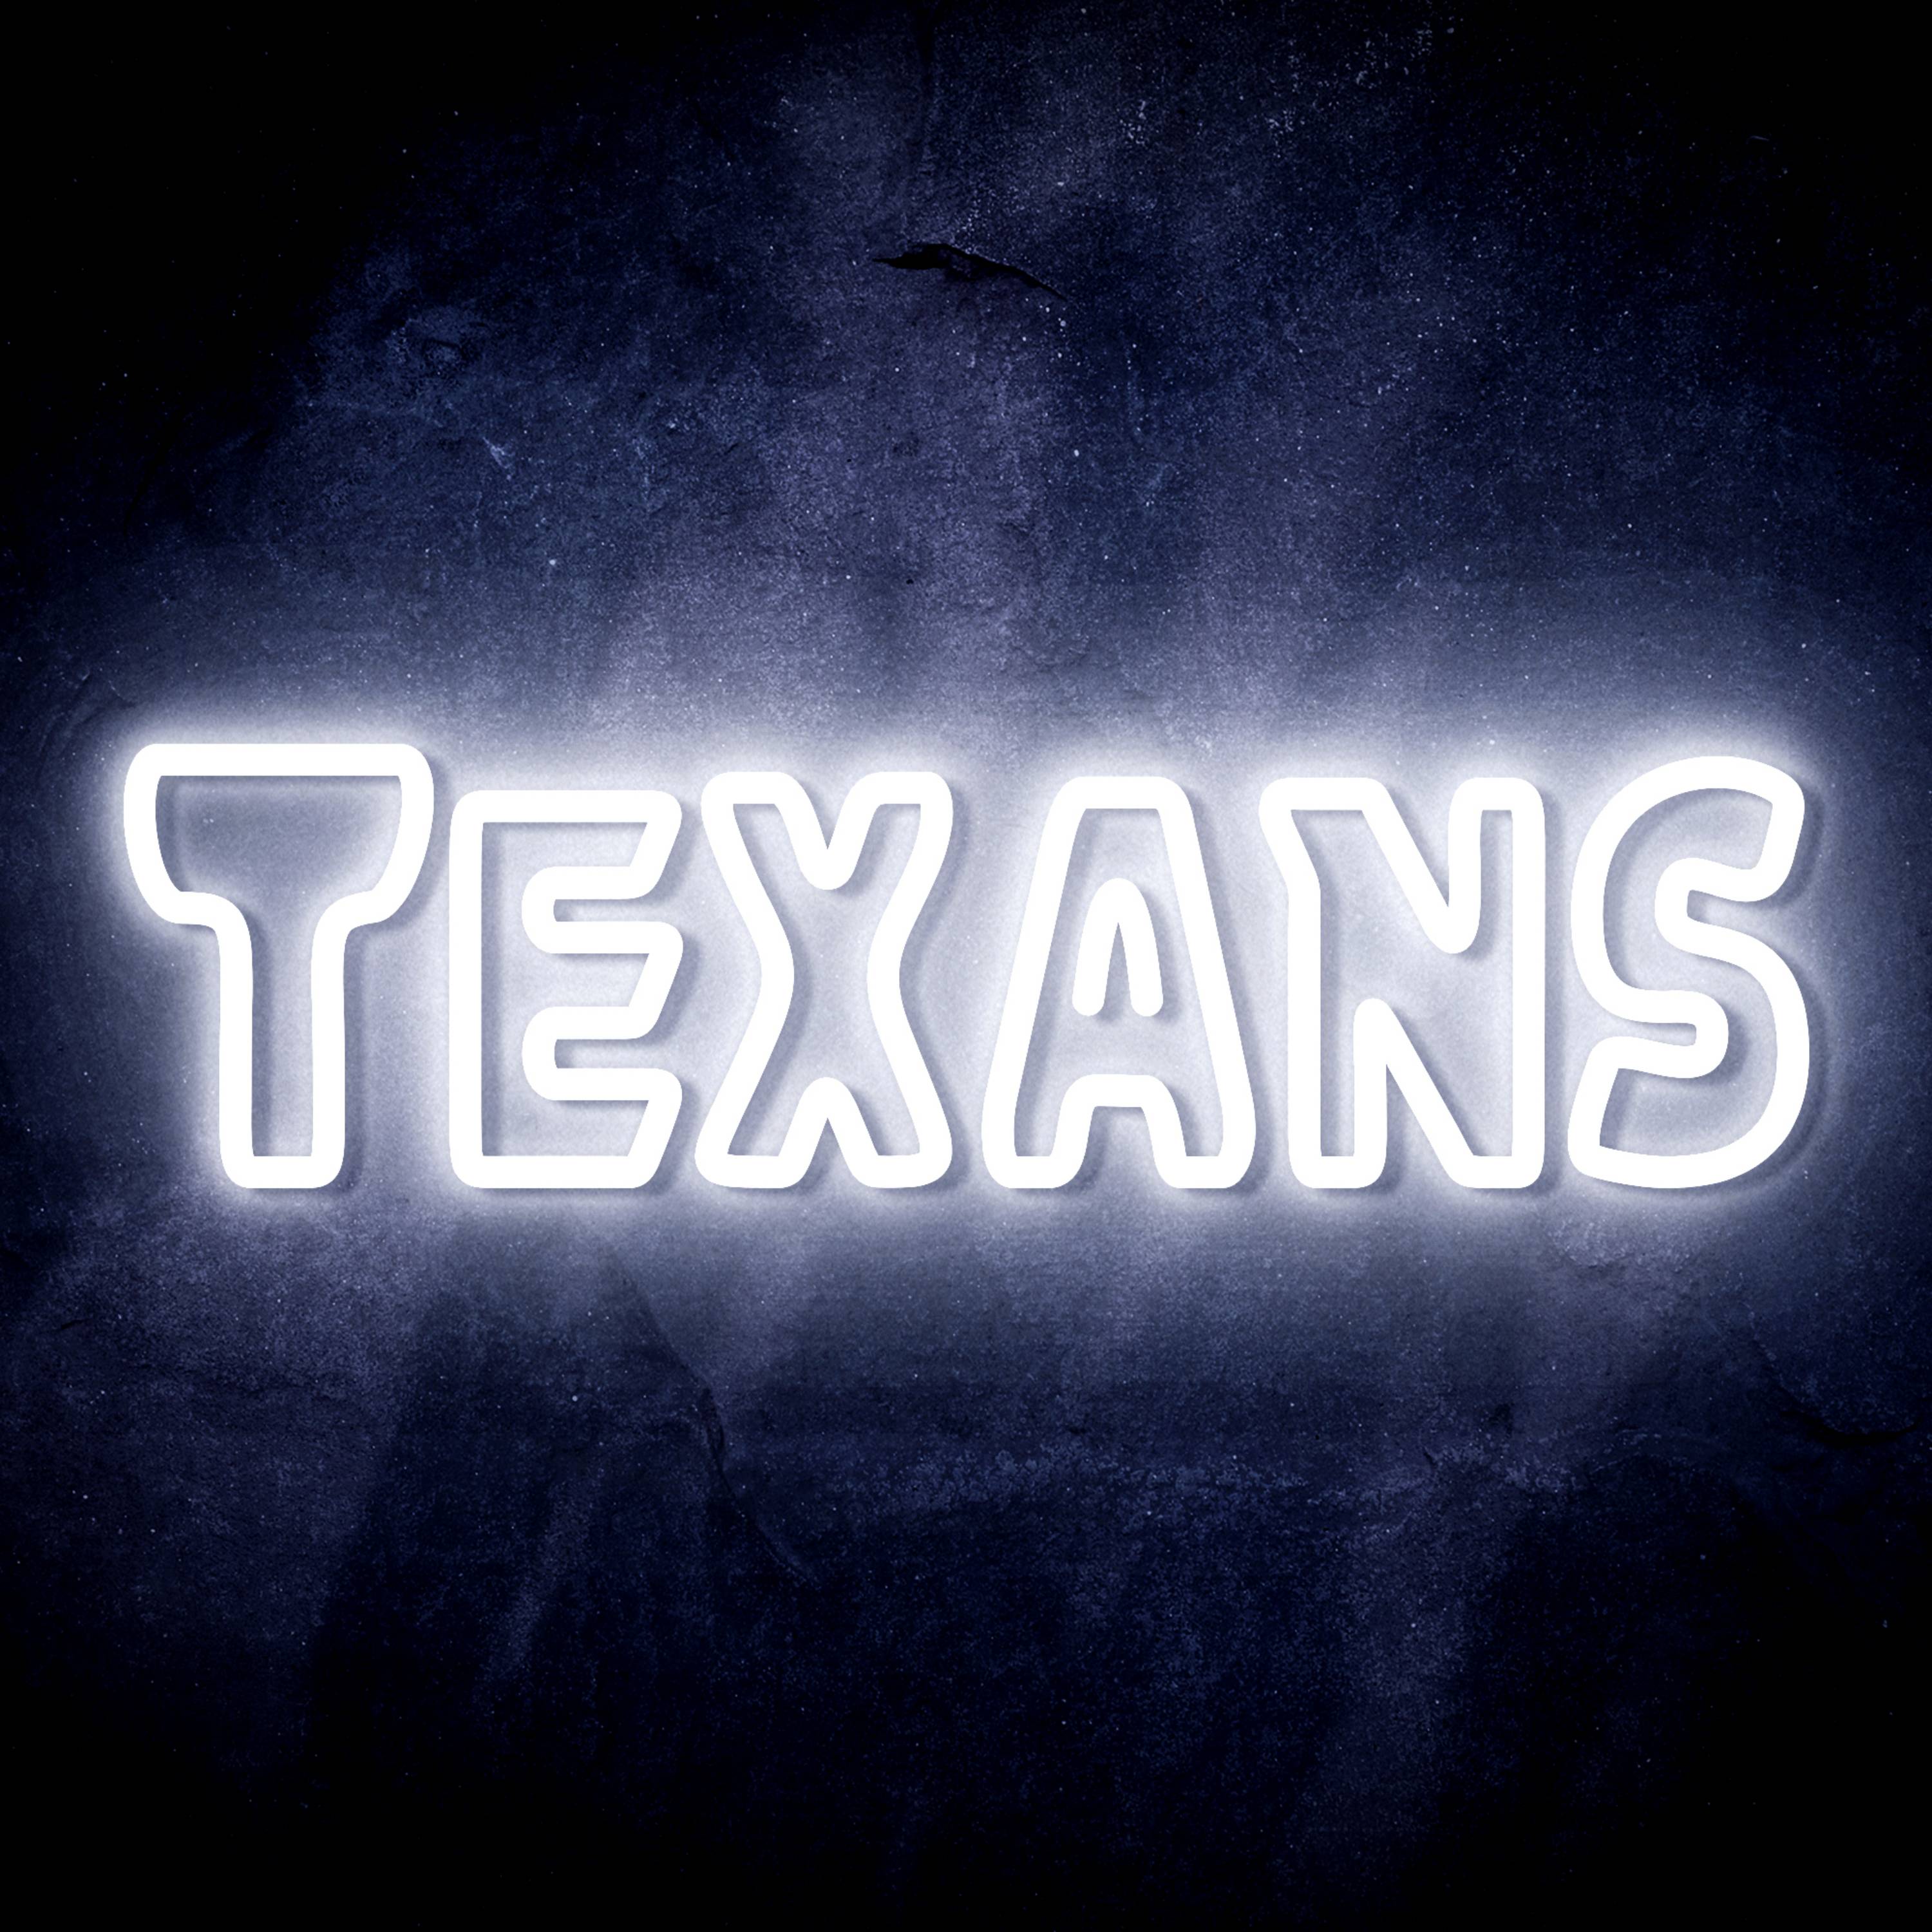 NFL TEXANS LED Neon Sign